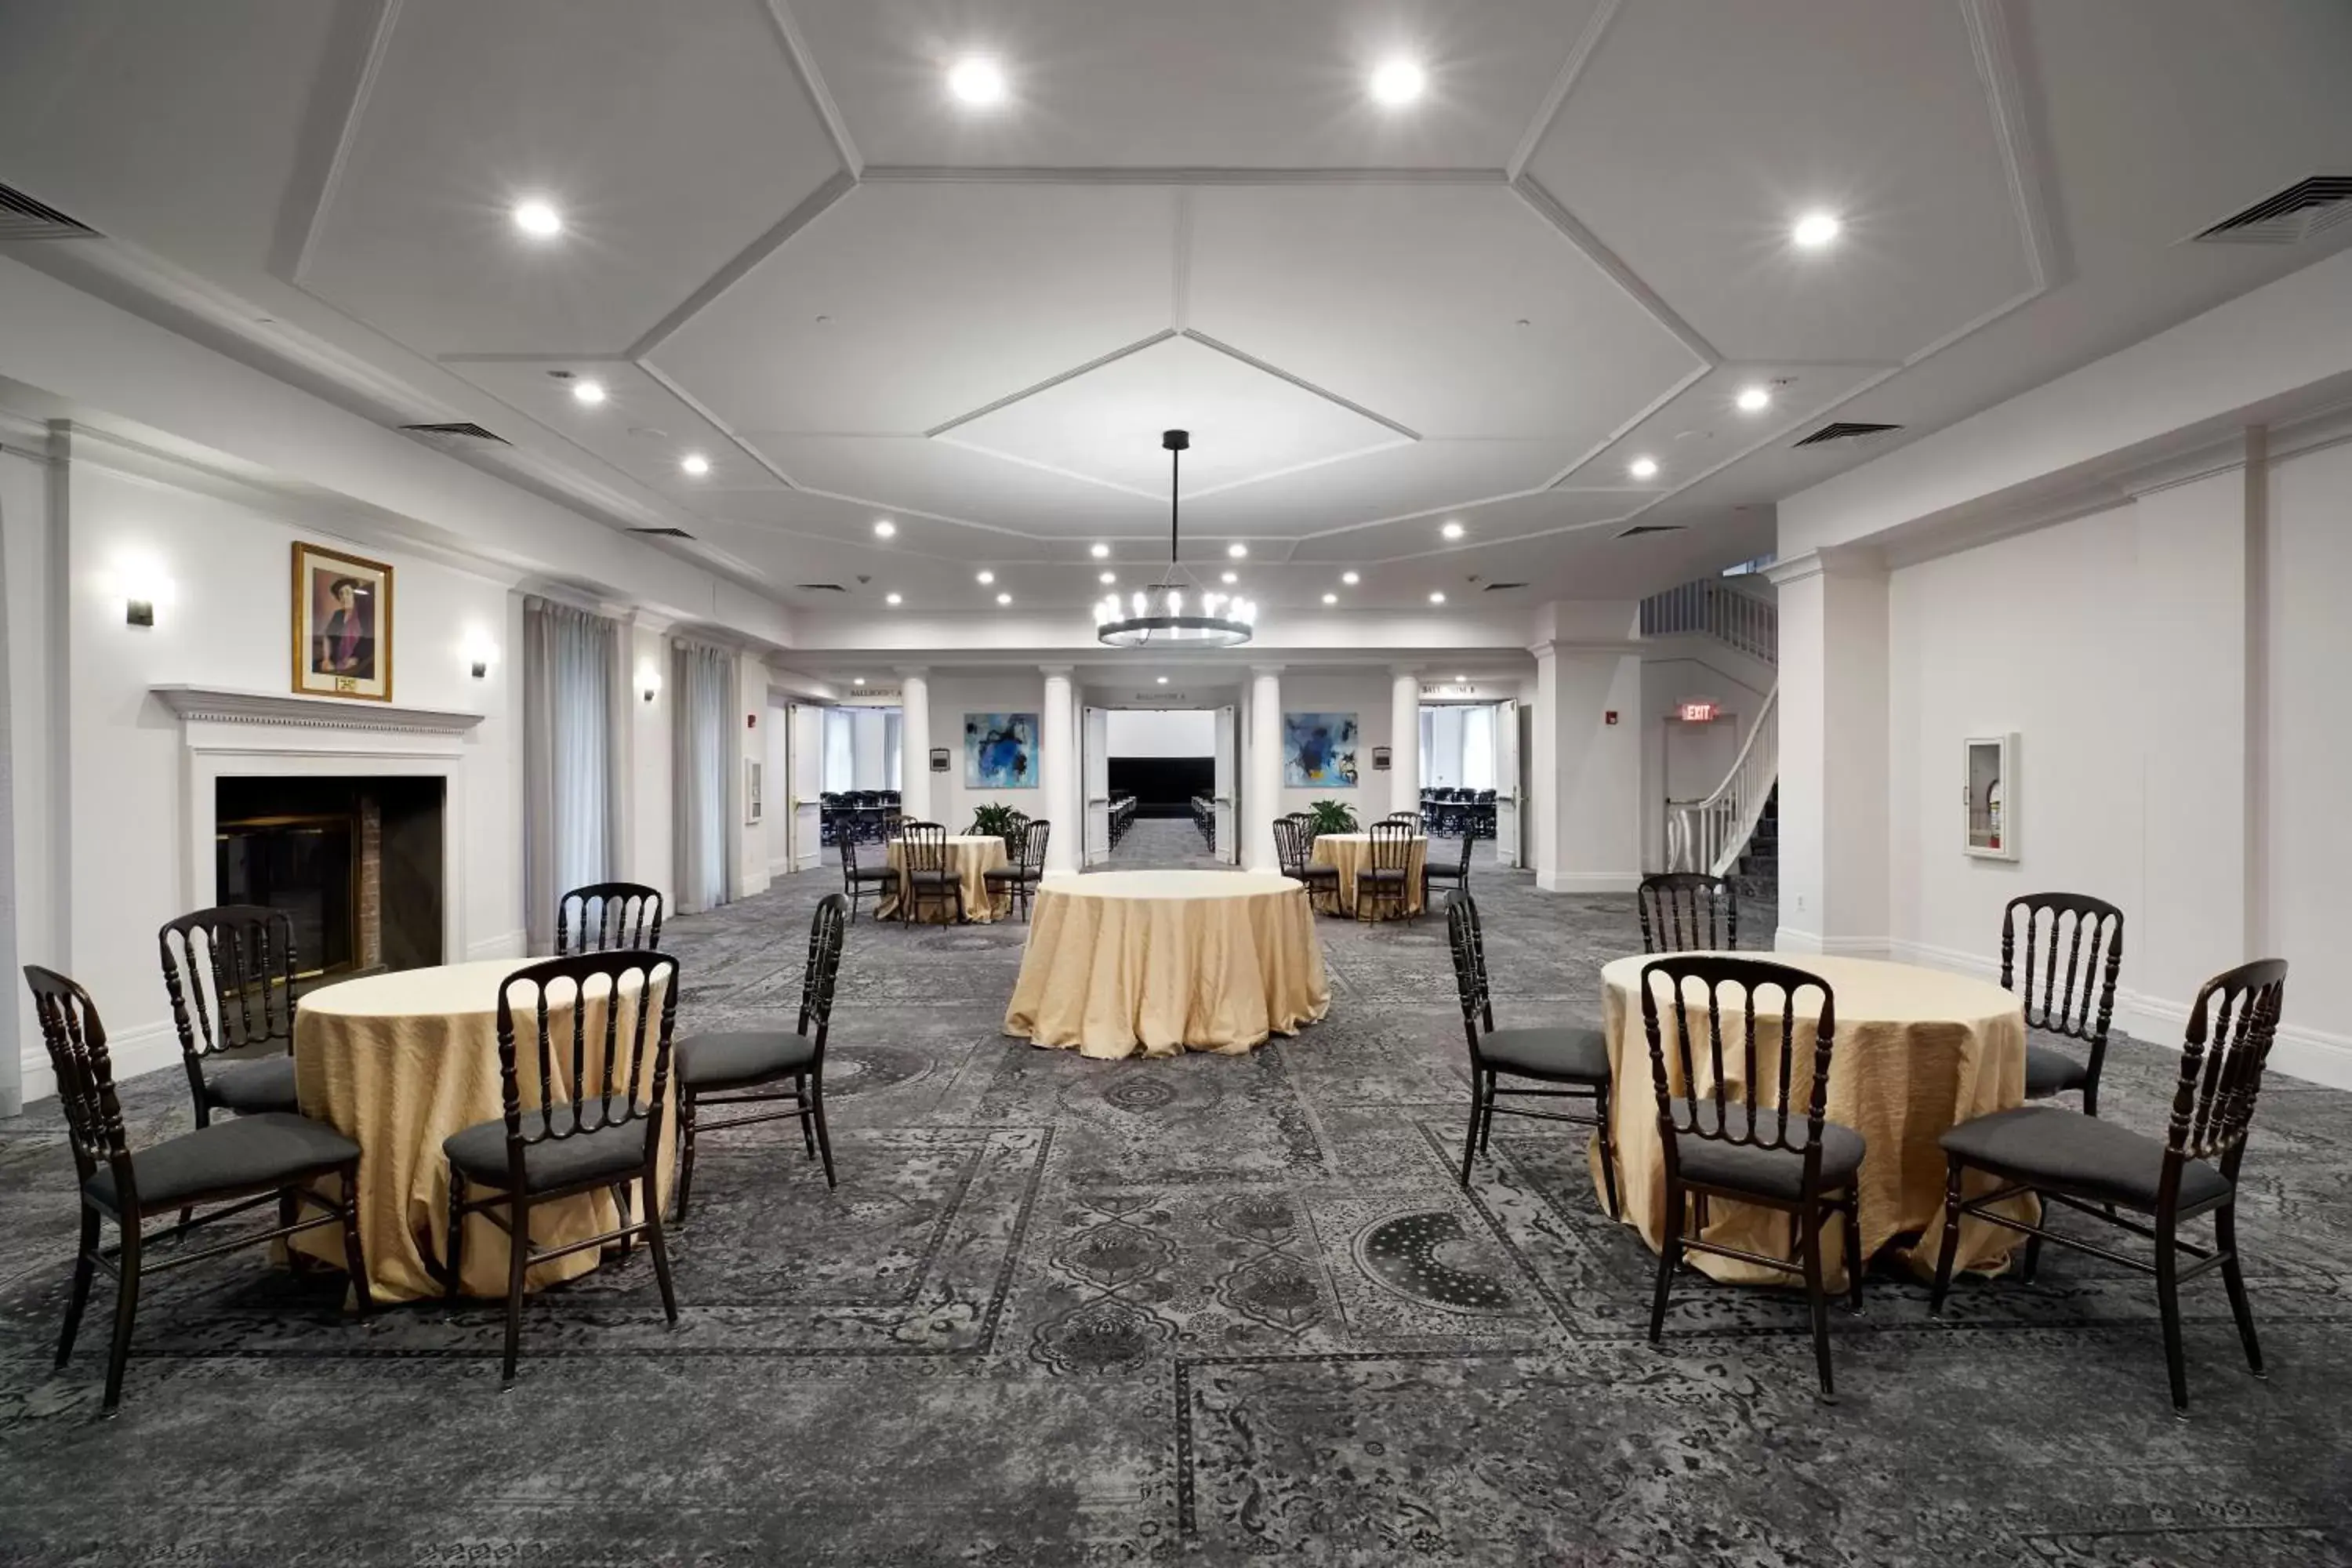 Banquet/Function facilities in Tarrytown House Estate on the Hudson